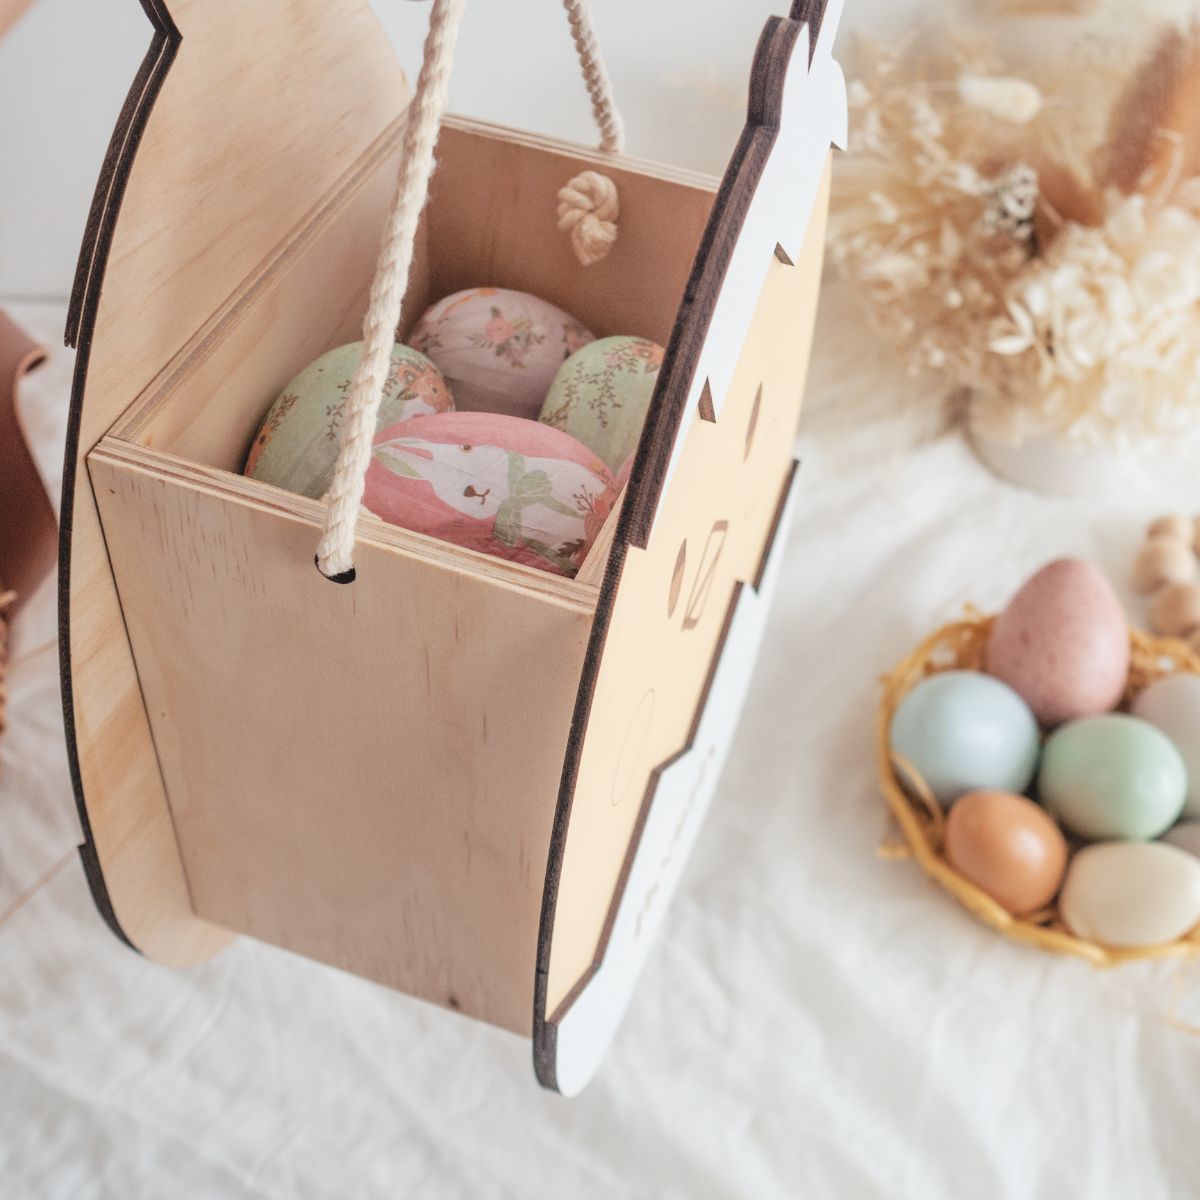 Wooden Easter Chick basket to store all the Easter goodies during the Easter hunt. Angle showing the inside of the box